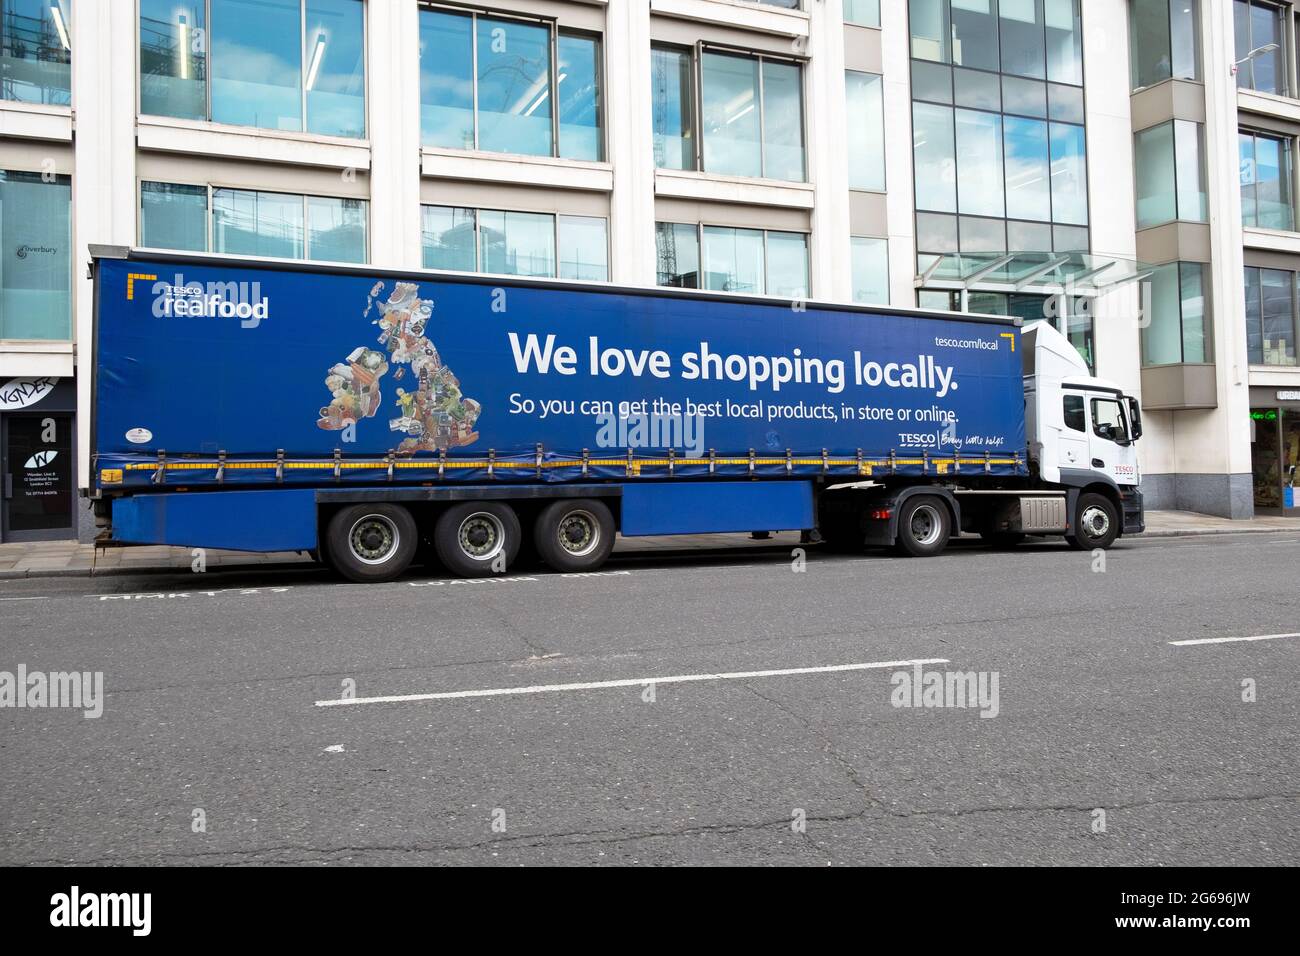 Tesco delivery lorry side view with advert 'We love shopping locally' parked outside Tescos Smithfield supermarket in the City of London England UK Stock Photo